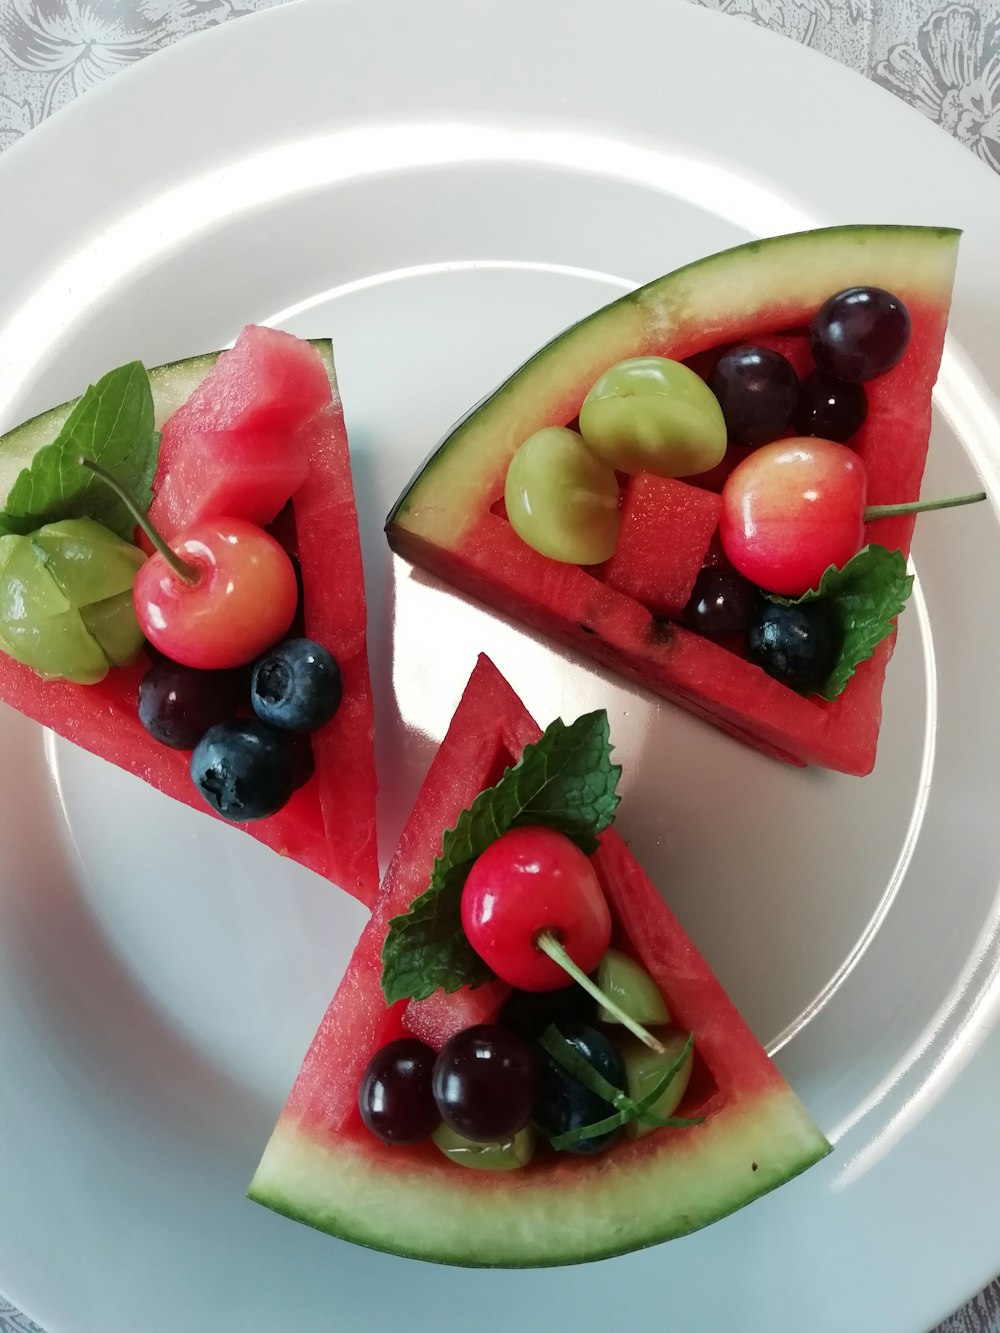 sliced fruits on green ceramic plate